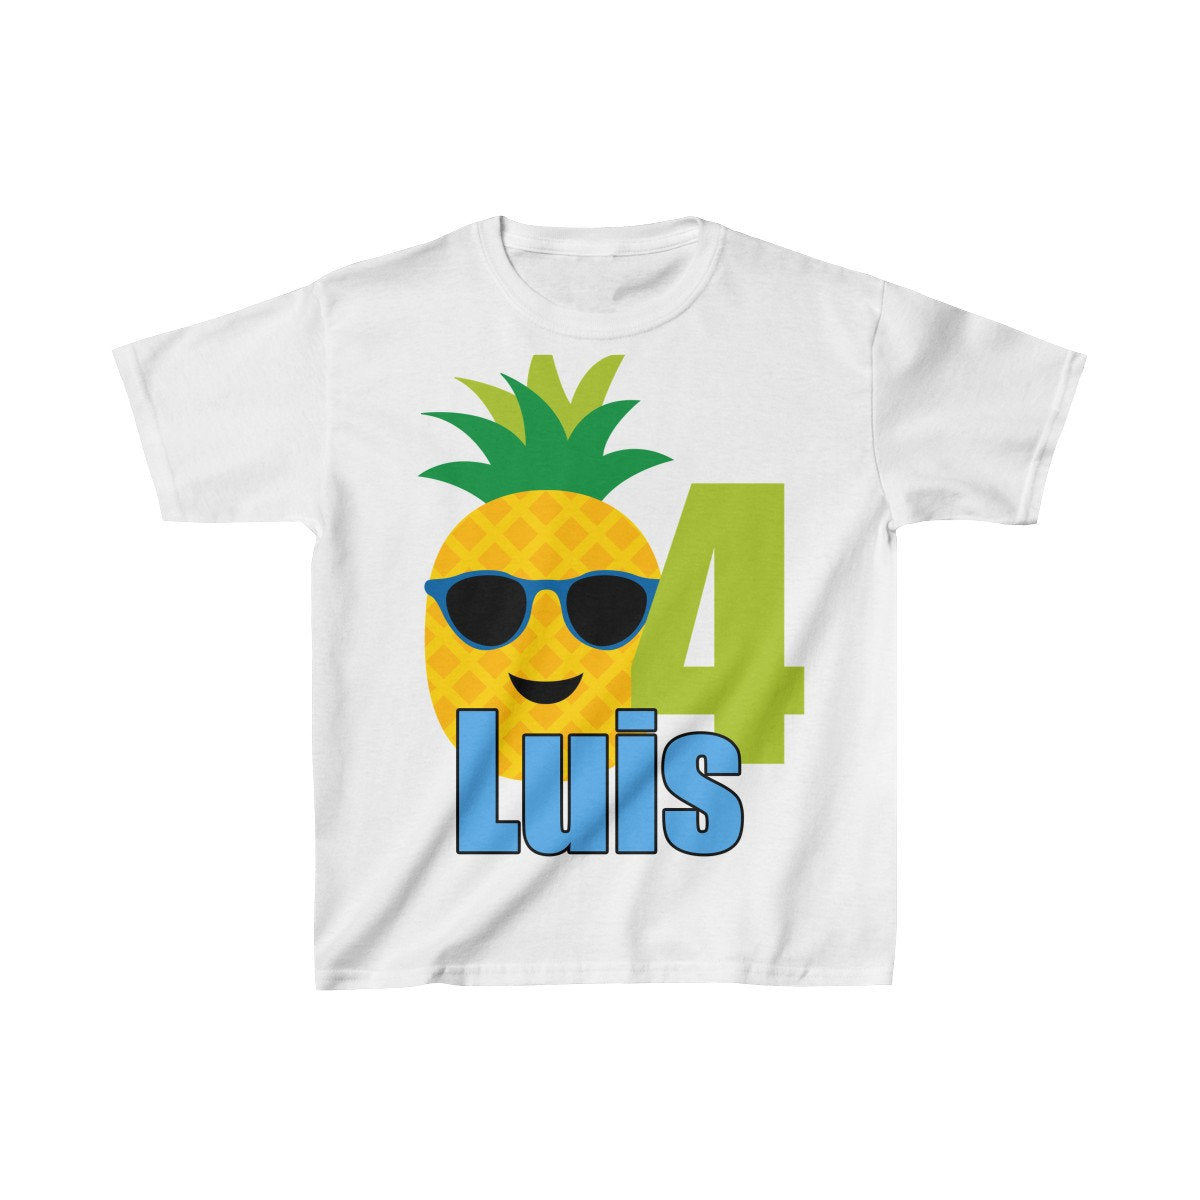 Pineapple with Sunglasses Birthday Shirt, Personalized Kids Birthday Party Shirt, Heavy Youth Cotton Tee, Multiple Colors, Tropical